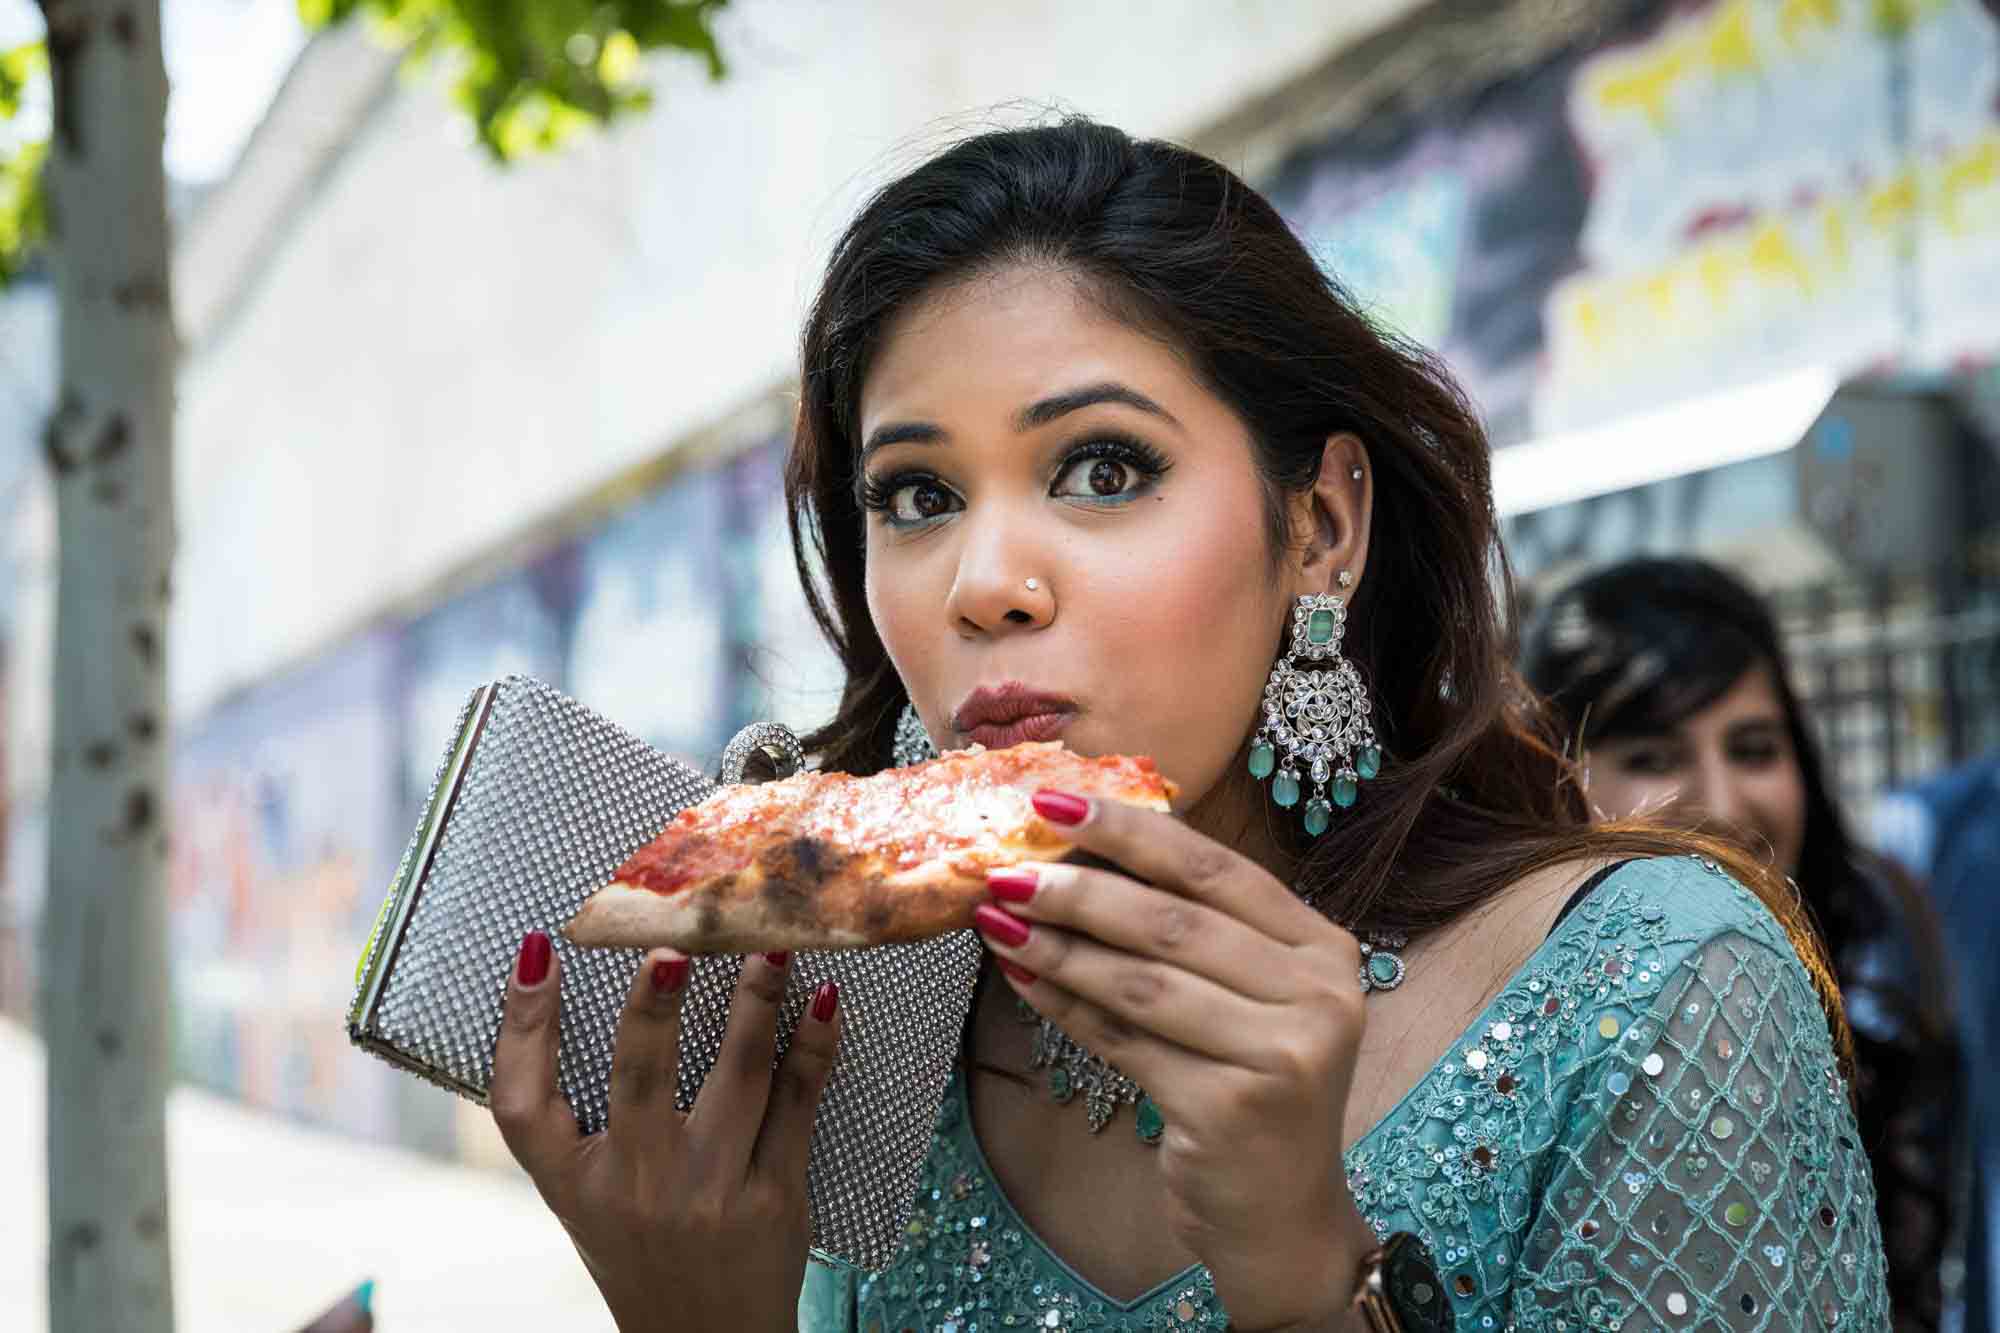 Female Indian guest wearing teal dress eating a piece of pizza